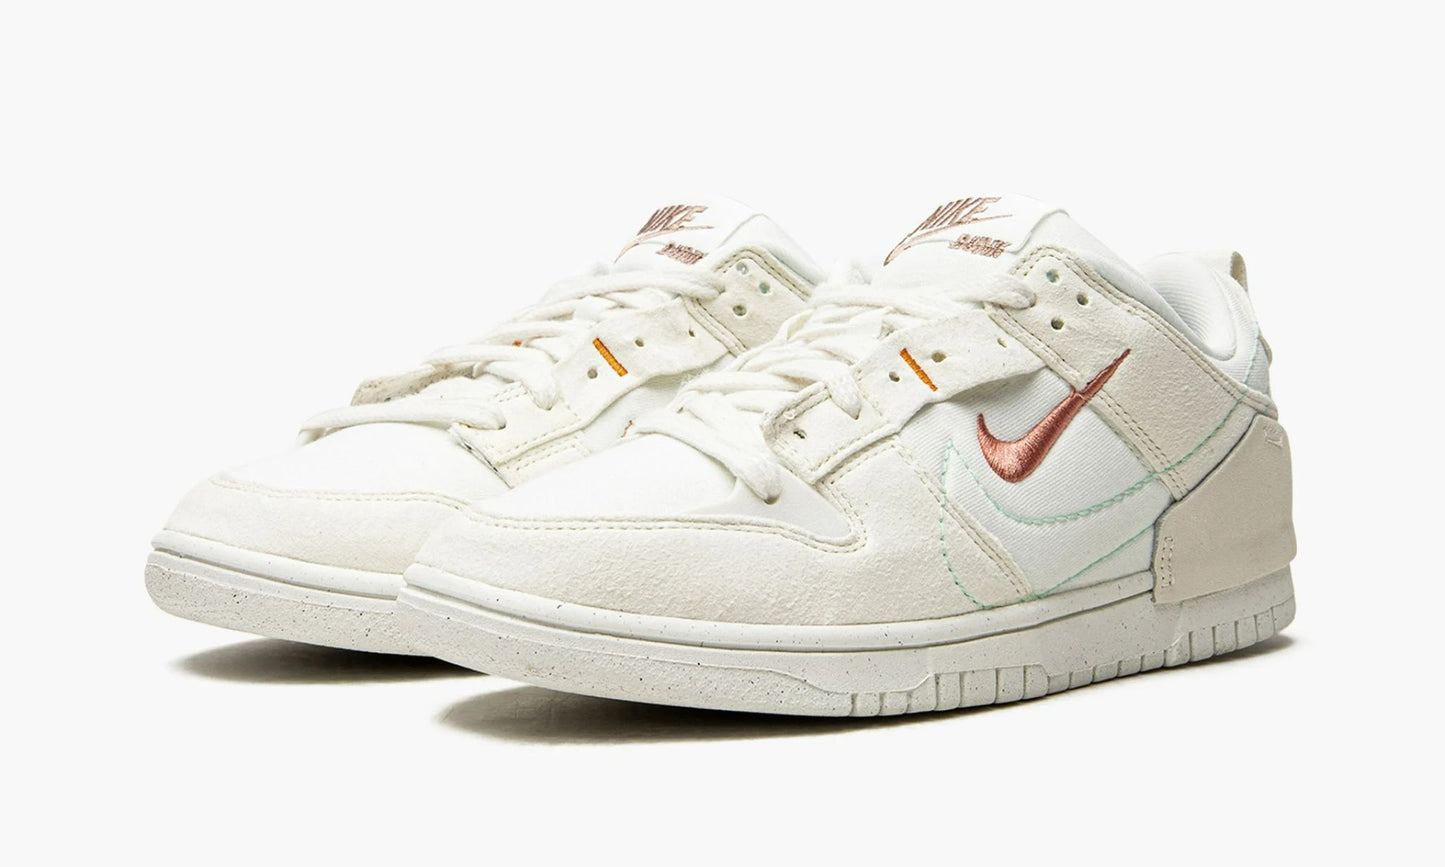 Dunk Low Disrupt 2 Pale Ivory - DH4402 100 | The Sortage